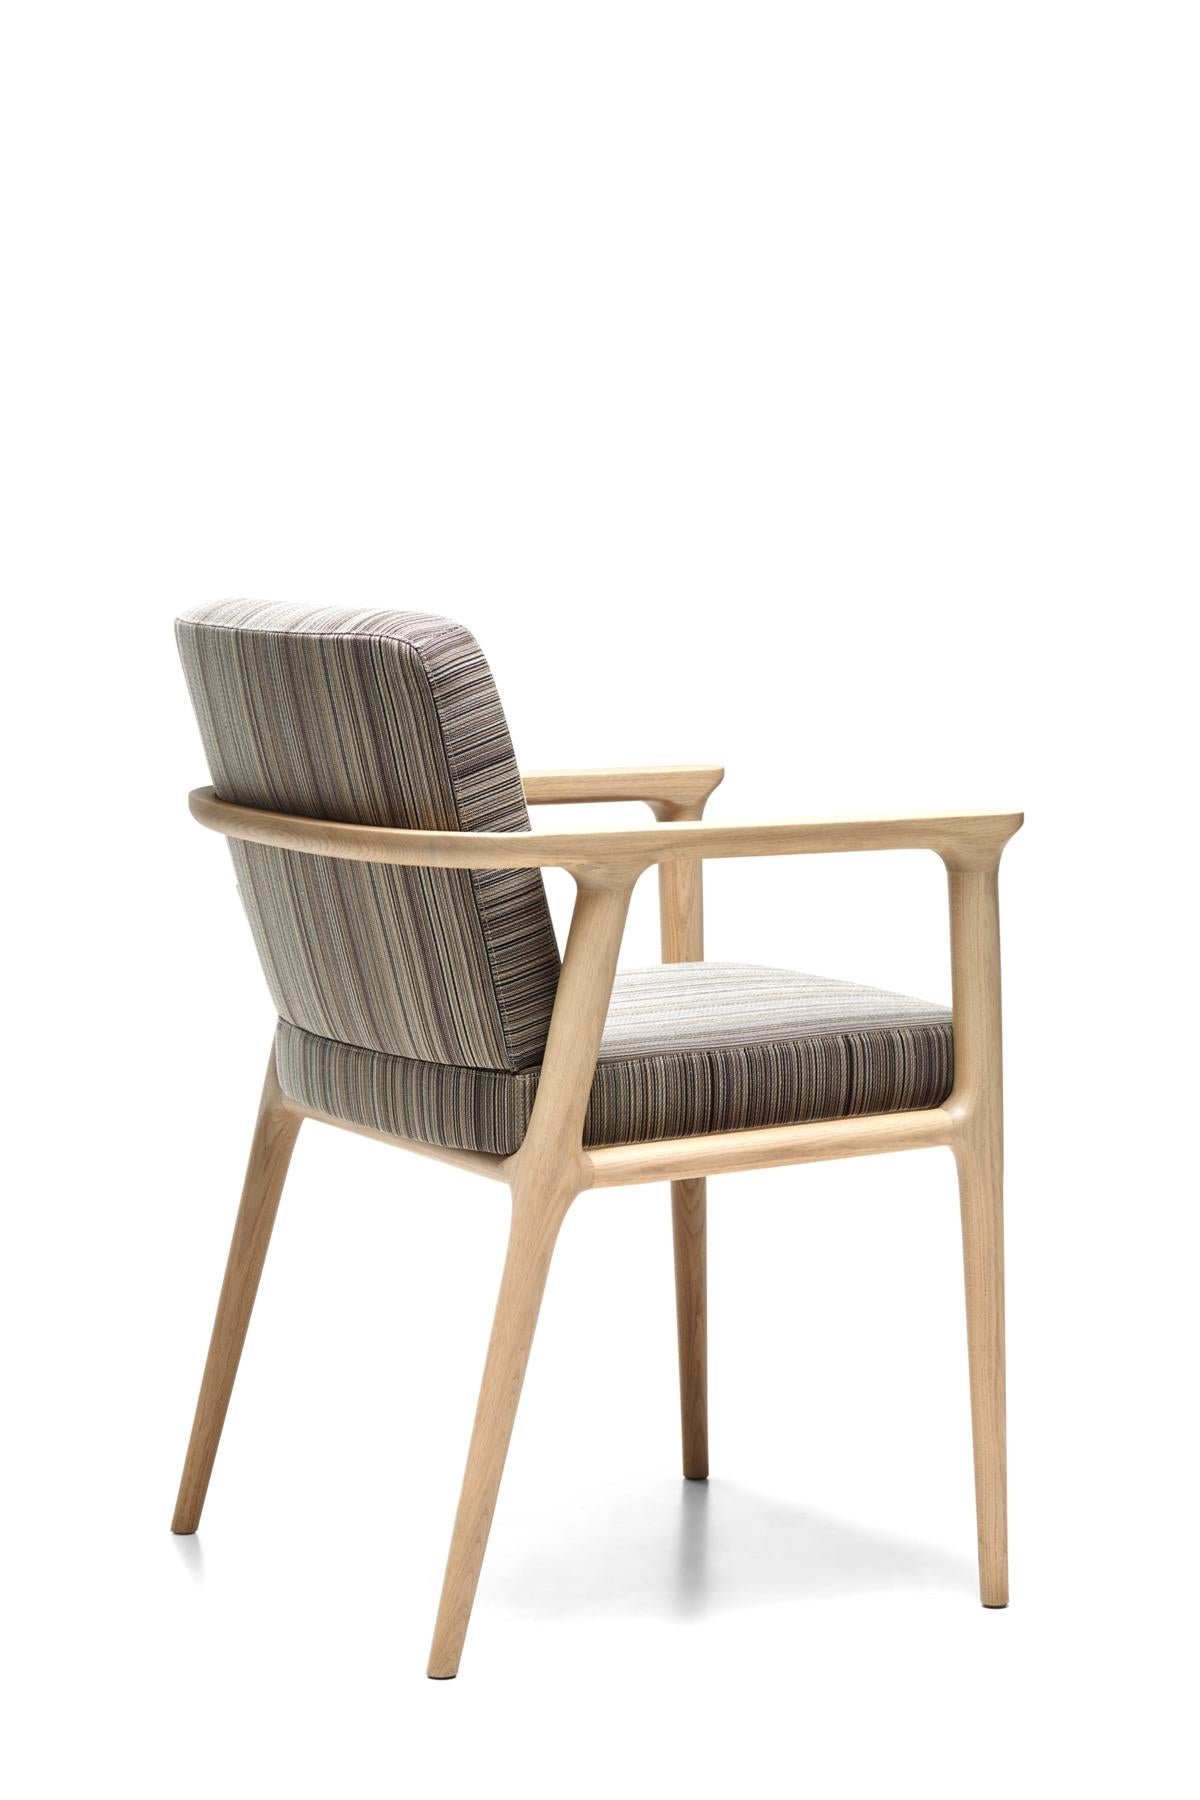 Modern Moooi Zio Dining Chair in Manga Brown Upholstery & Oak Stained White Wash Frame For Sale